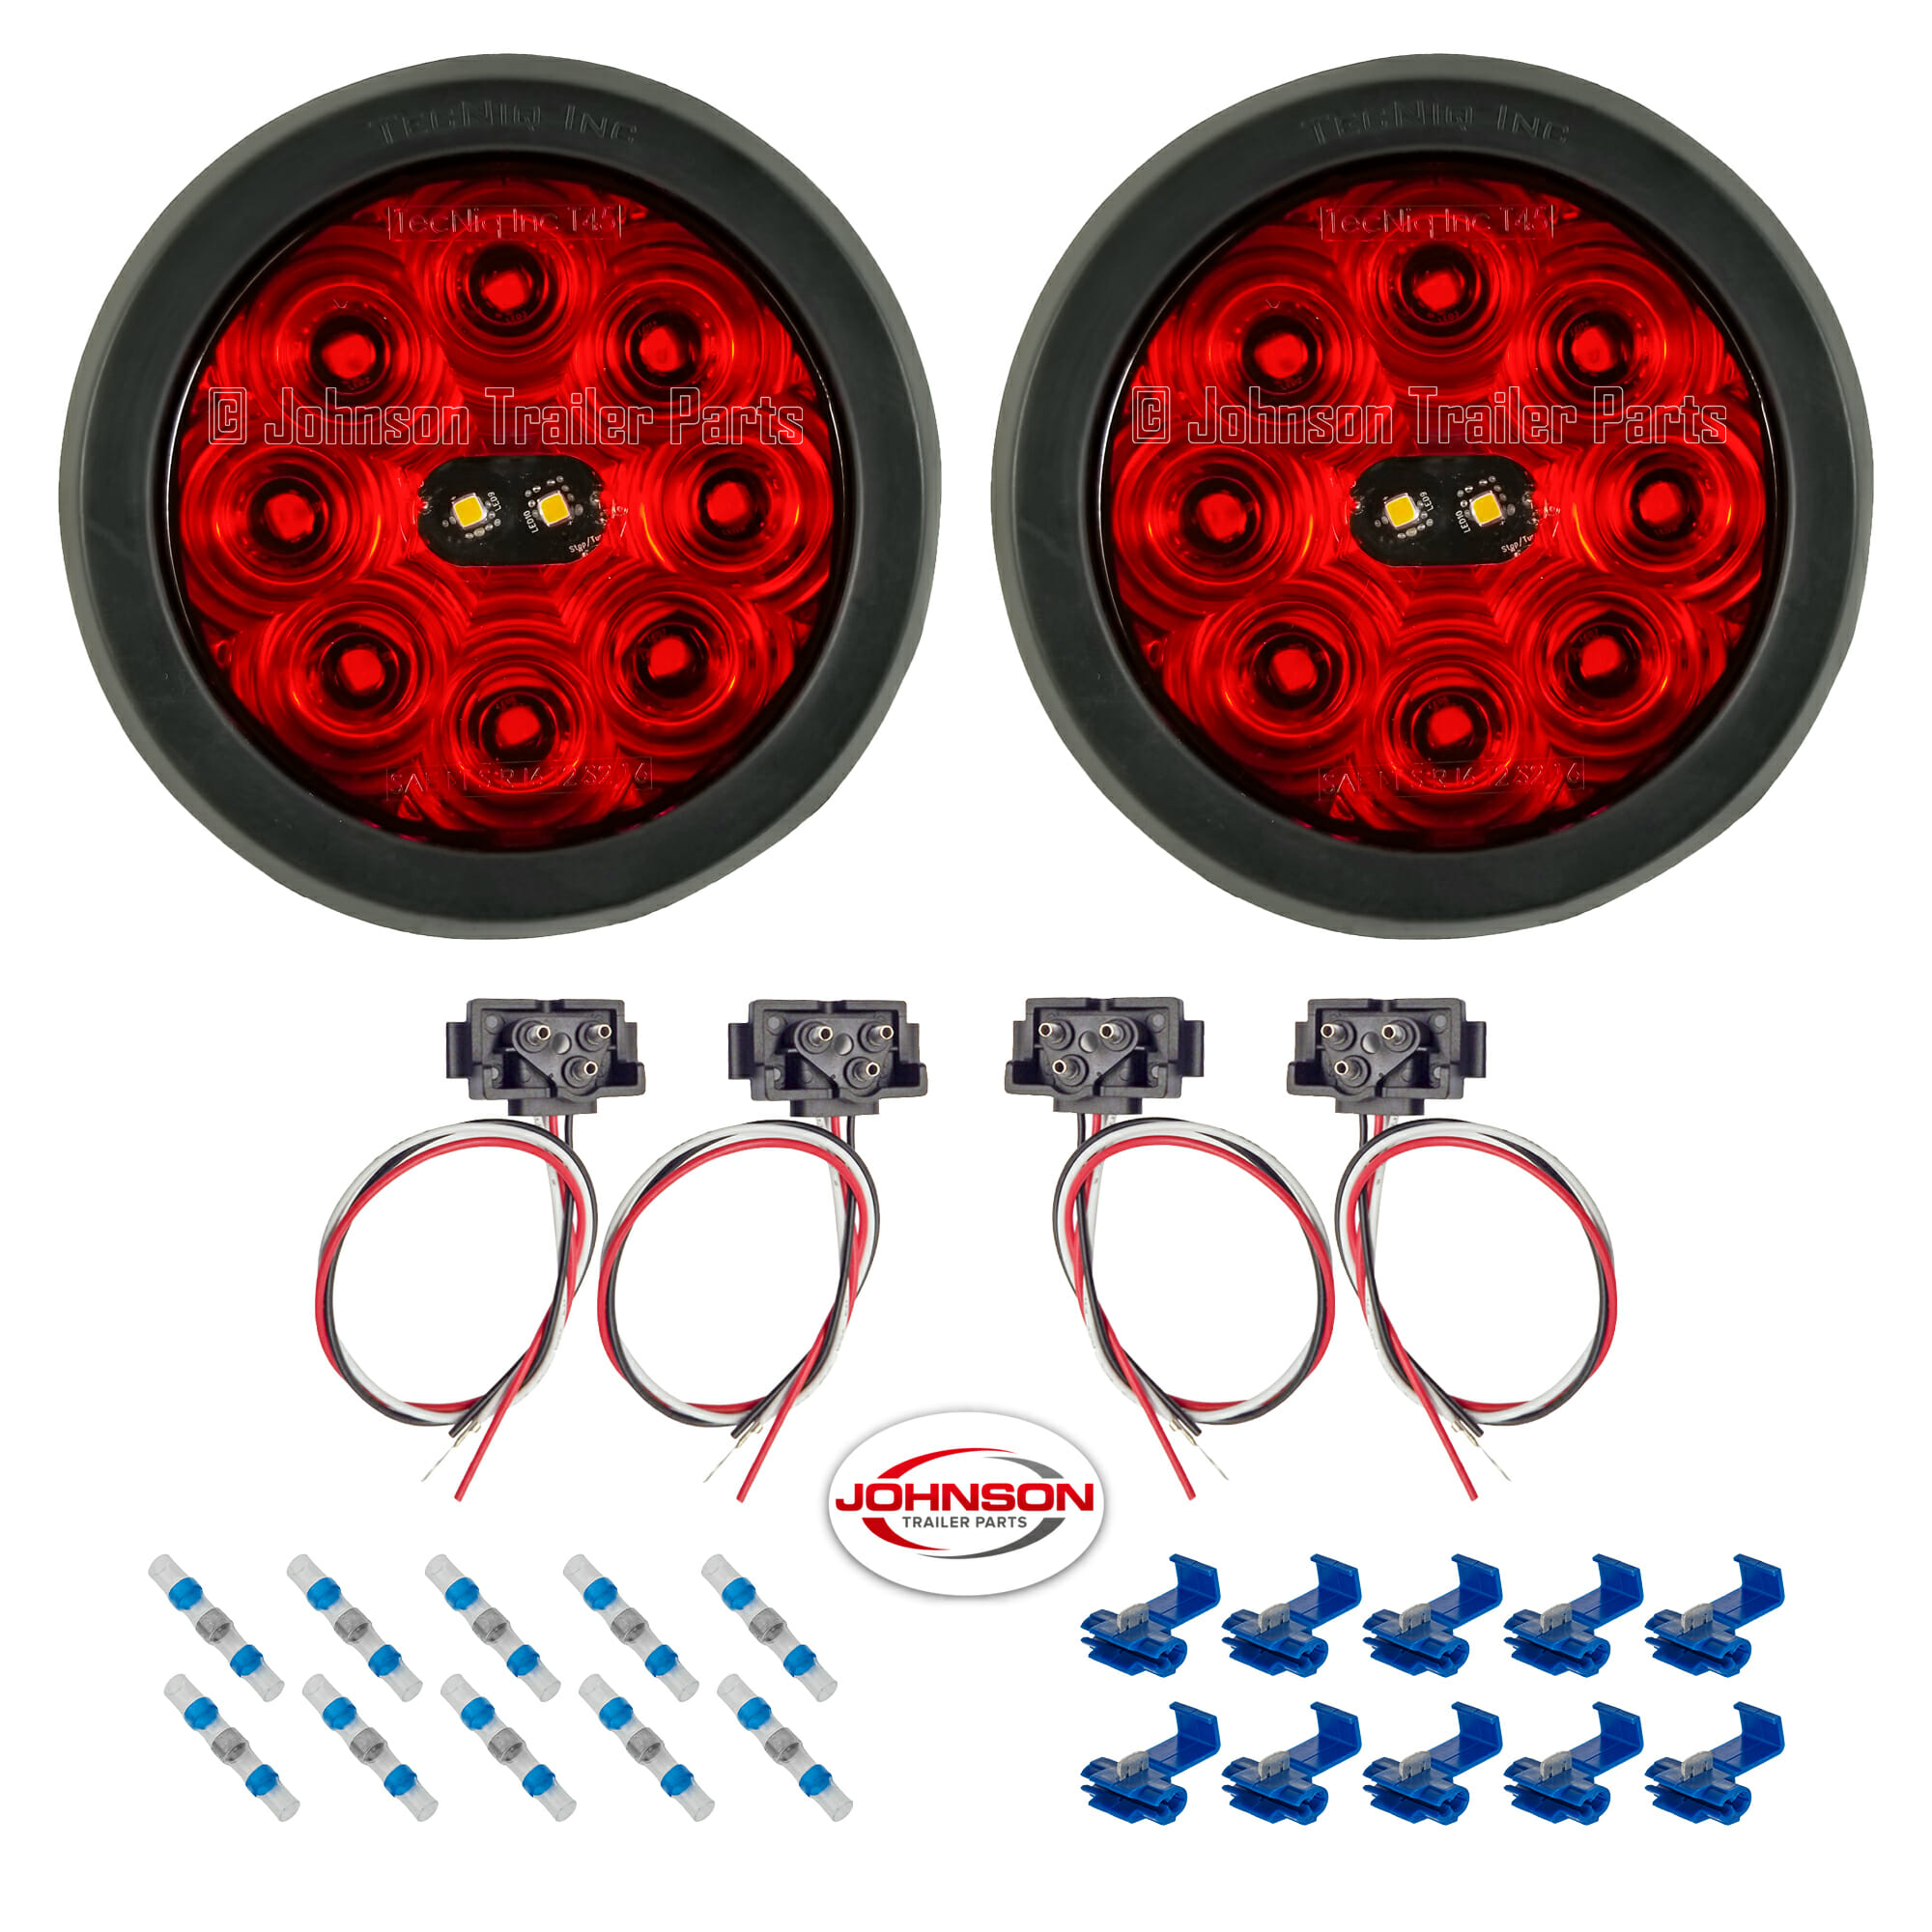 S/T/T Lights w/ Grommets - SEMI TRUCK 18 LED PAIR 4" RED